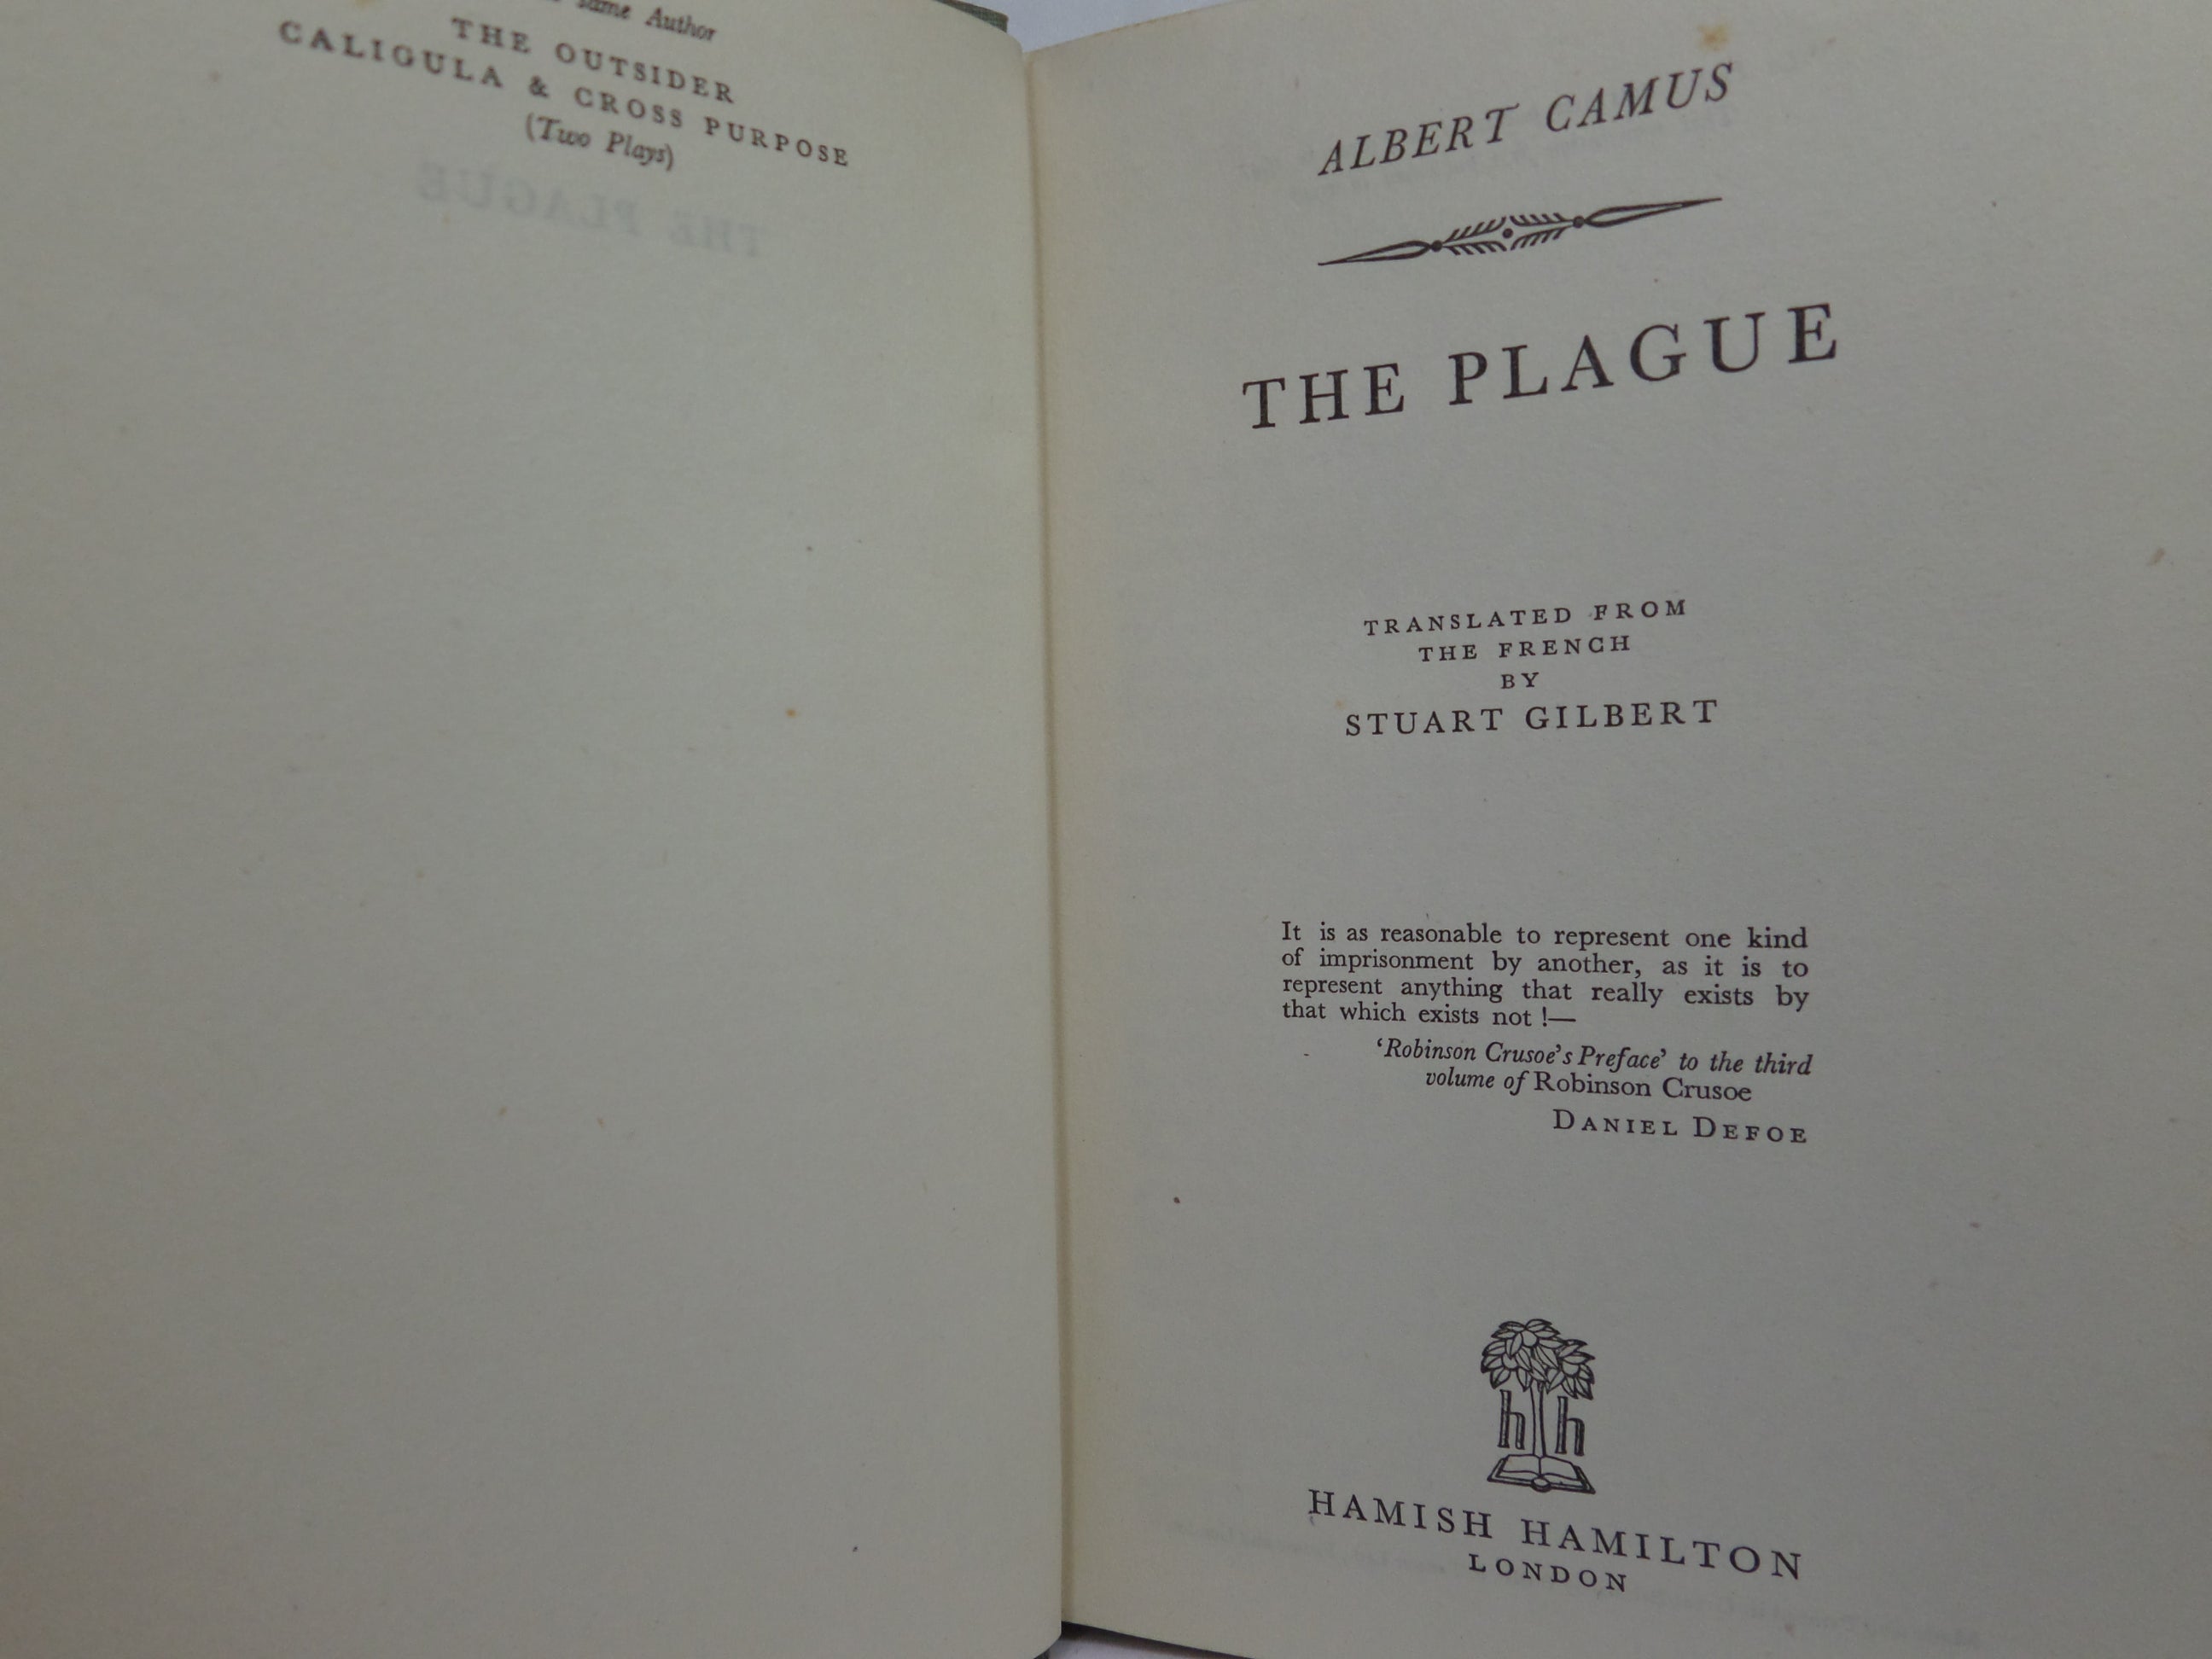 THE PLAGUE BY ALBERT CAMUS 1948 FIRST EDITION